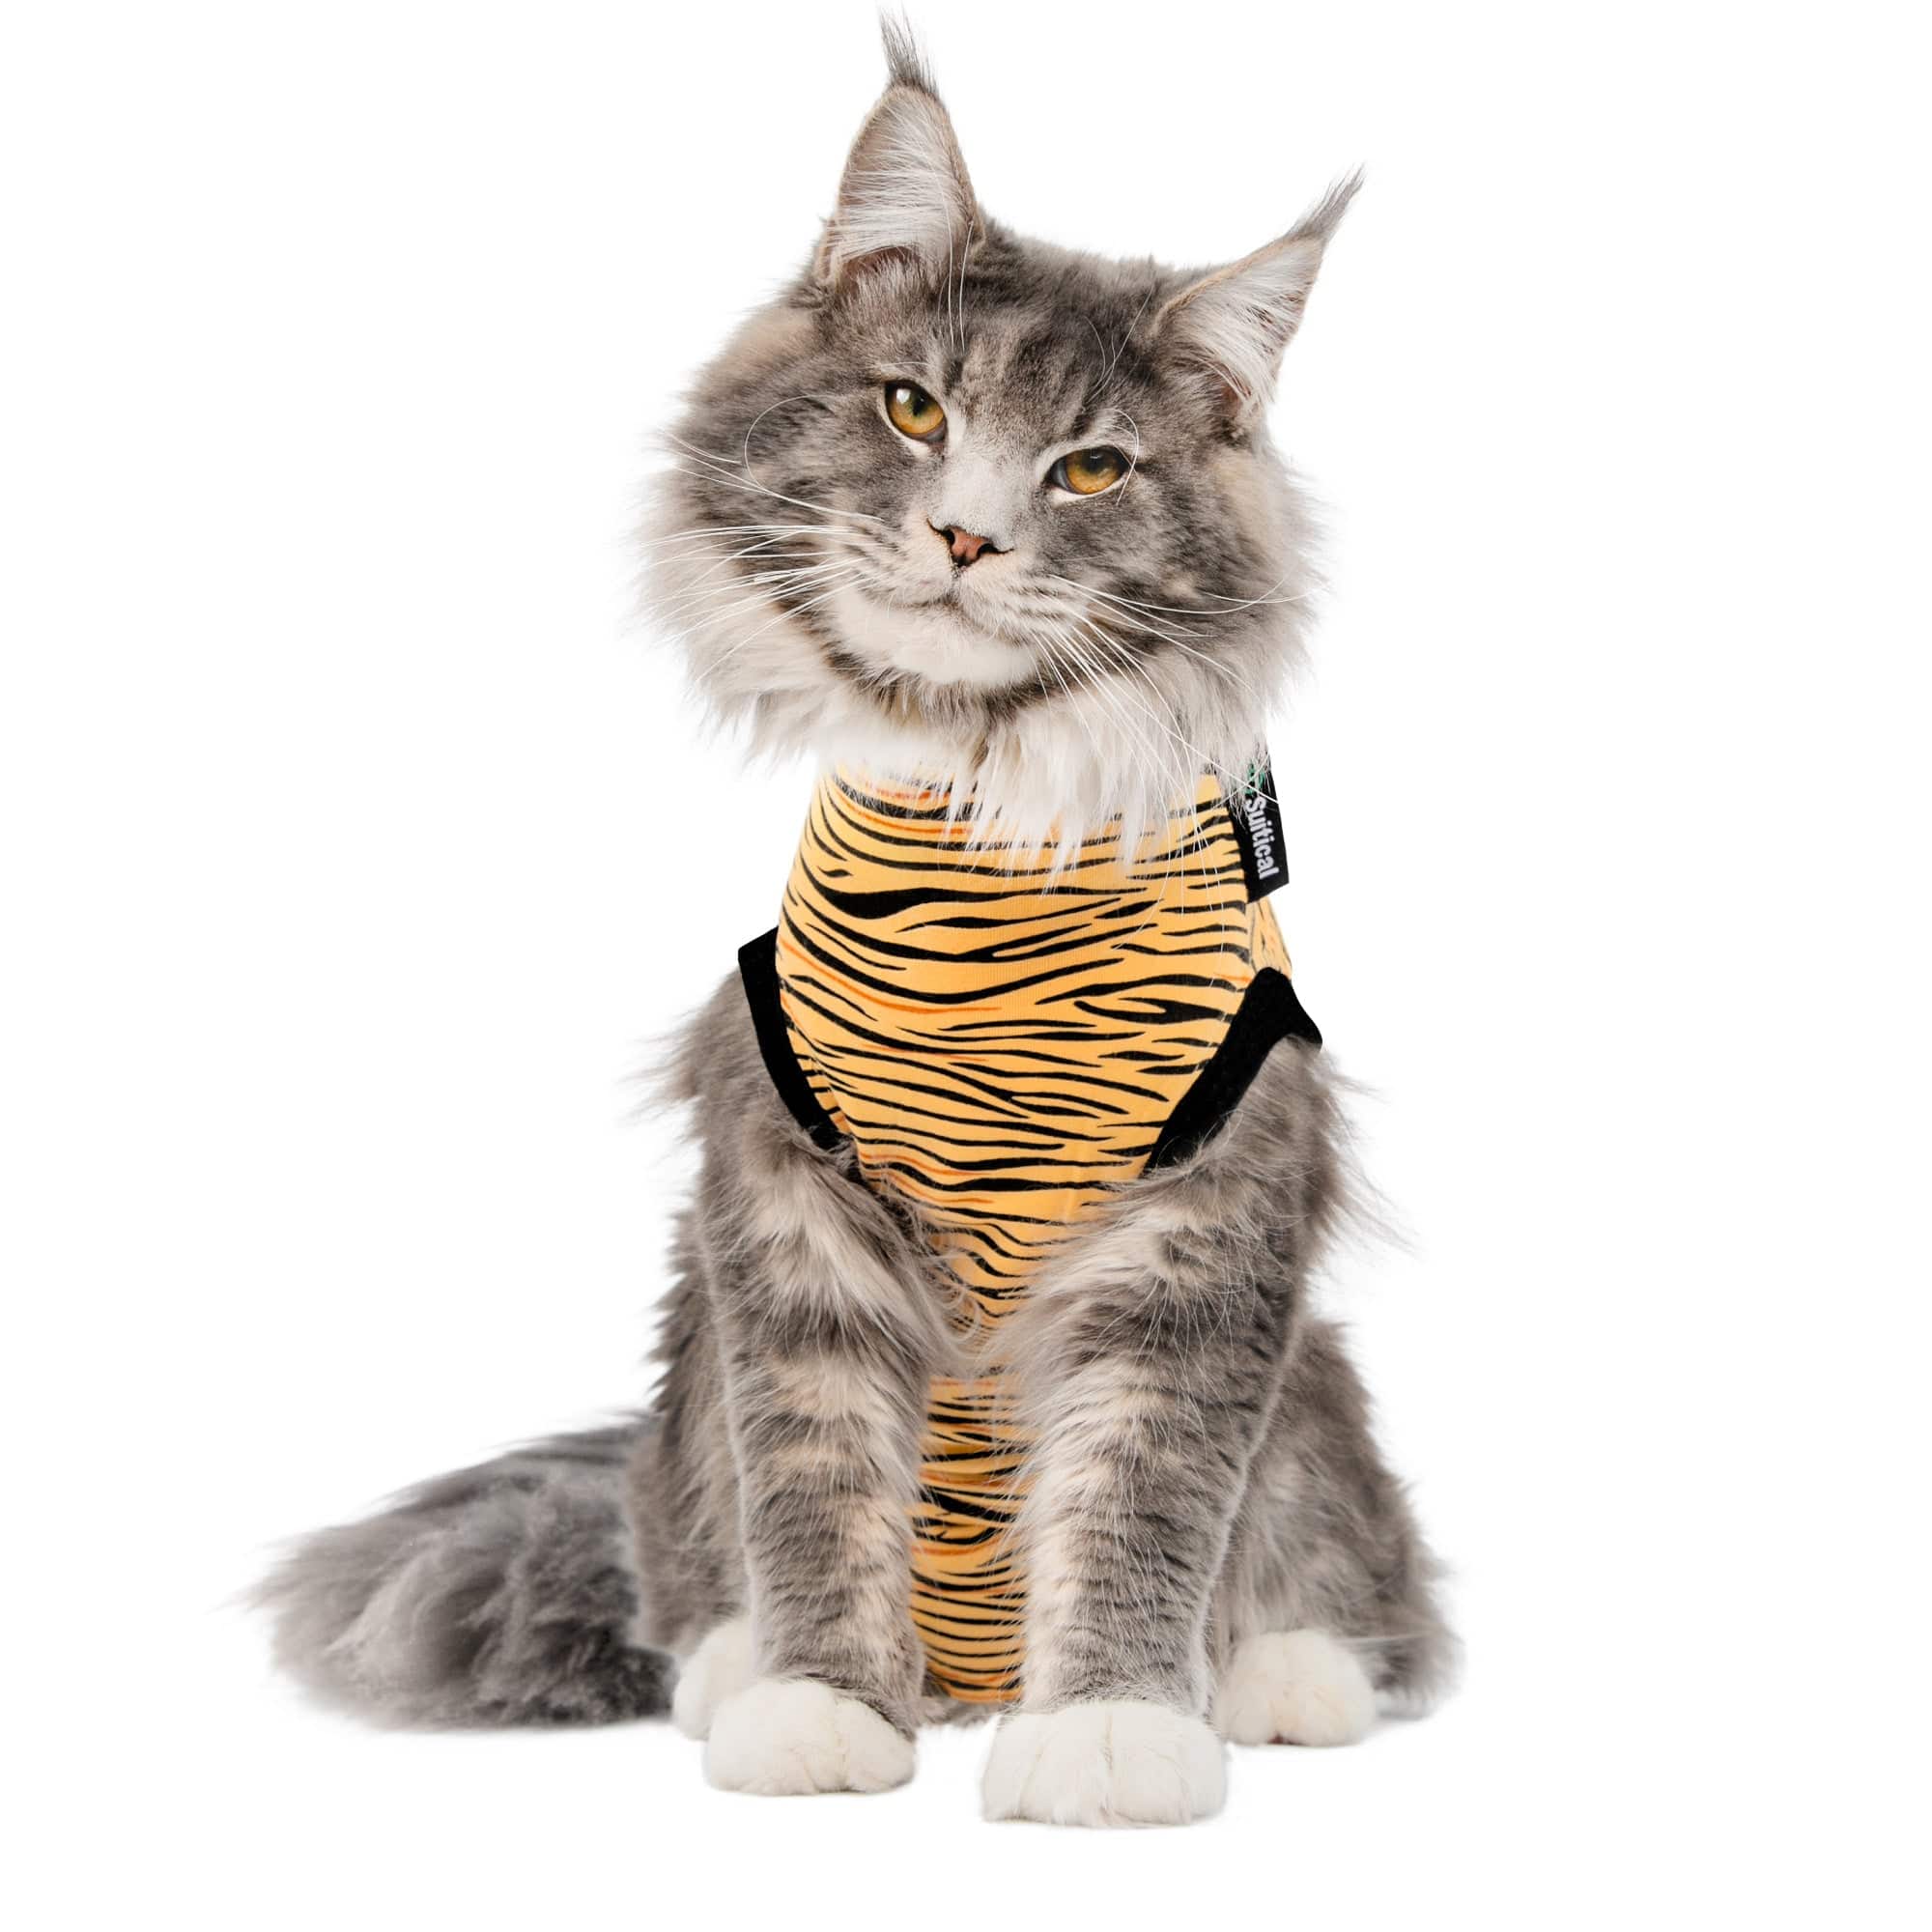 Tiger cat recovery suit by Suitical